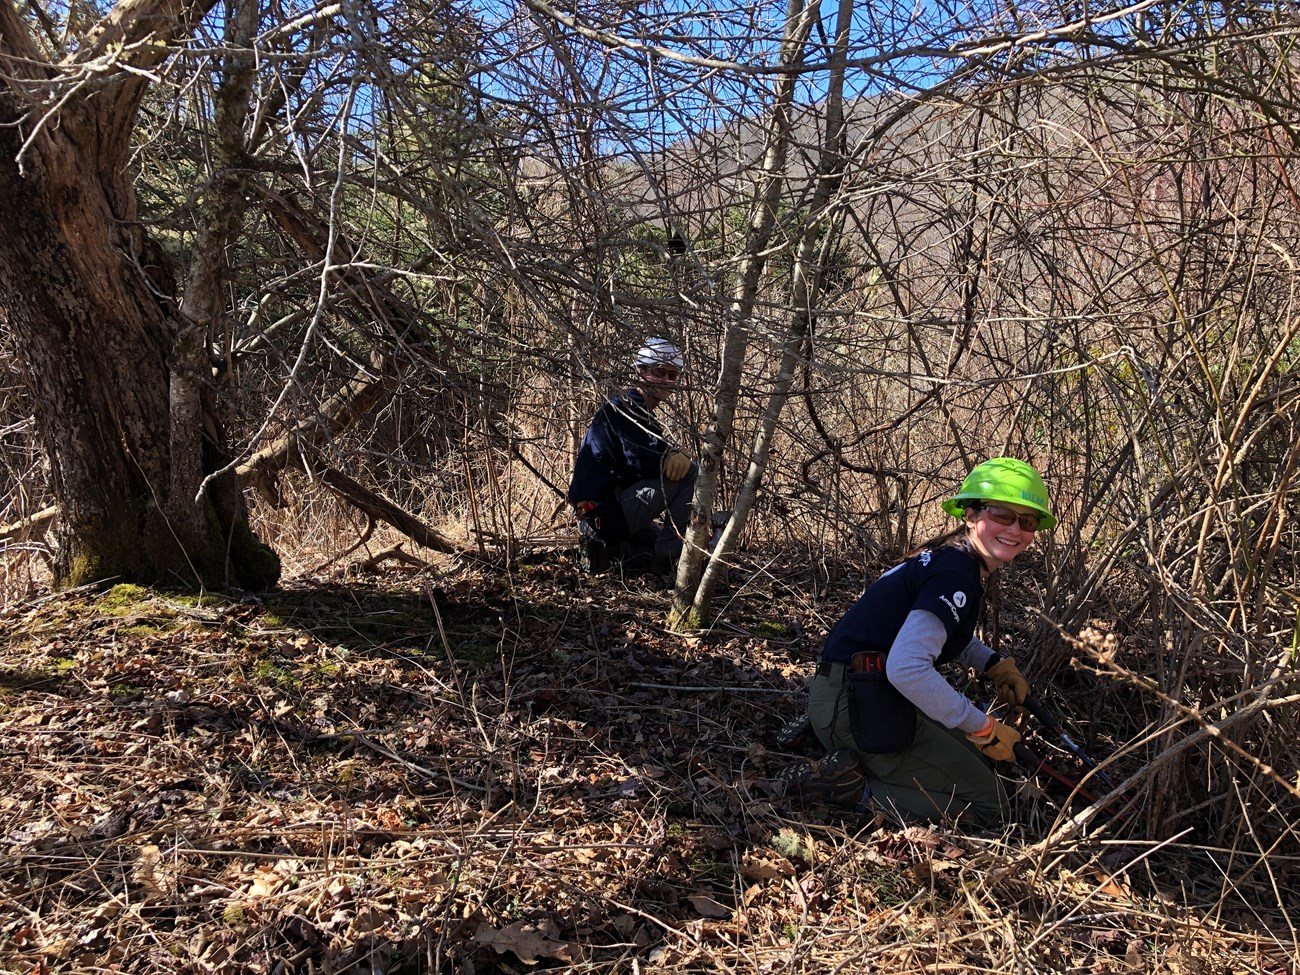 Two people with hardhats and handtools kneel to cut into dense, leafless vegetation.